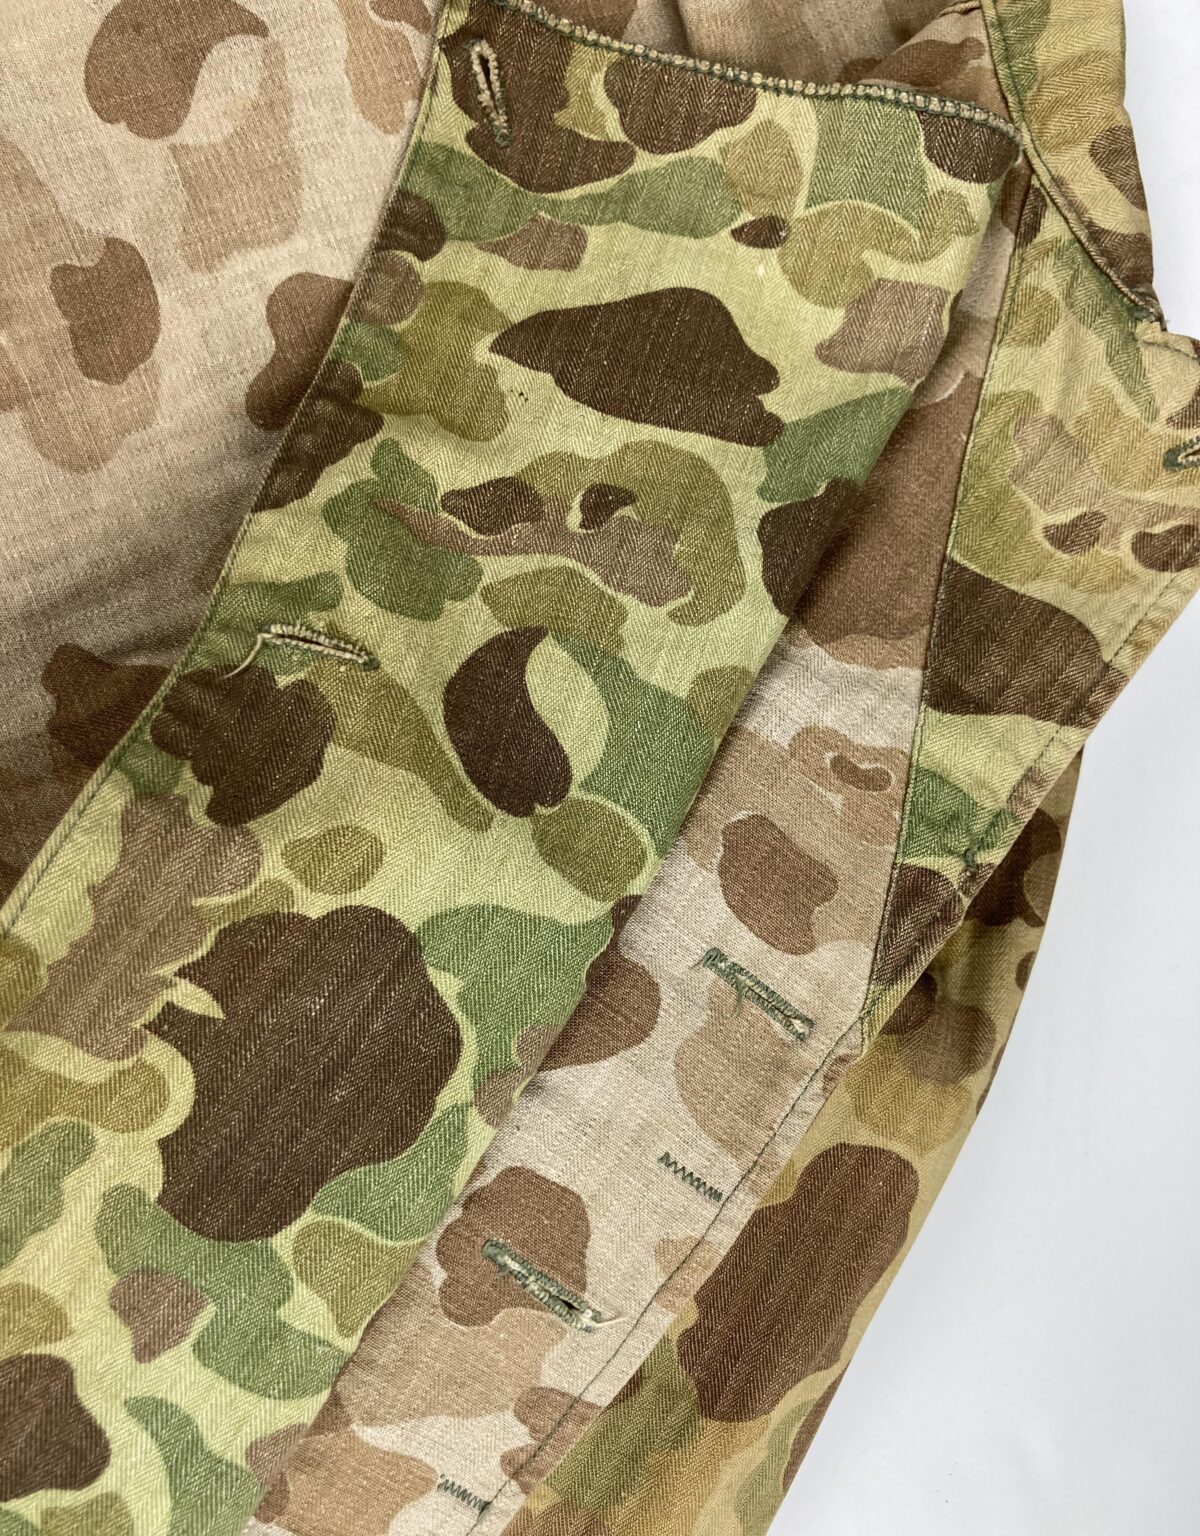 U.S Army Issued M1942 Camouflage Jacket